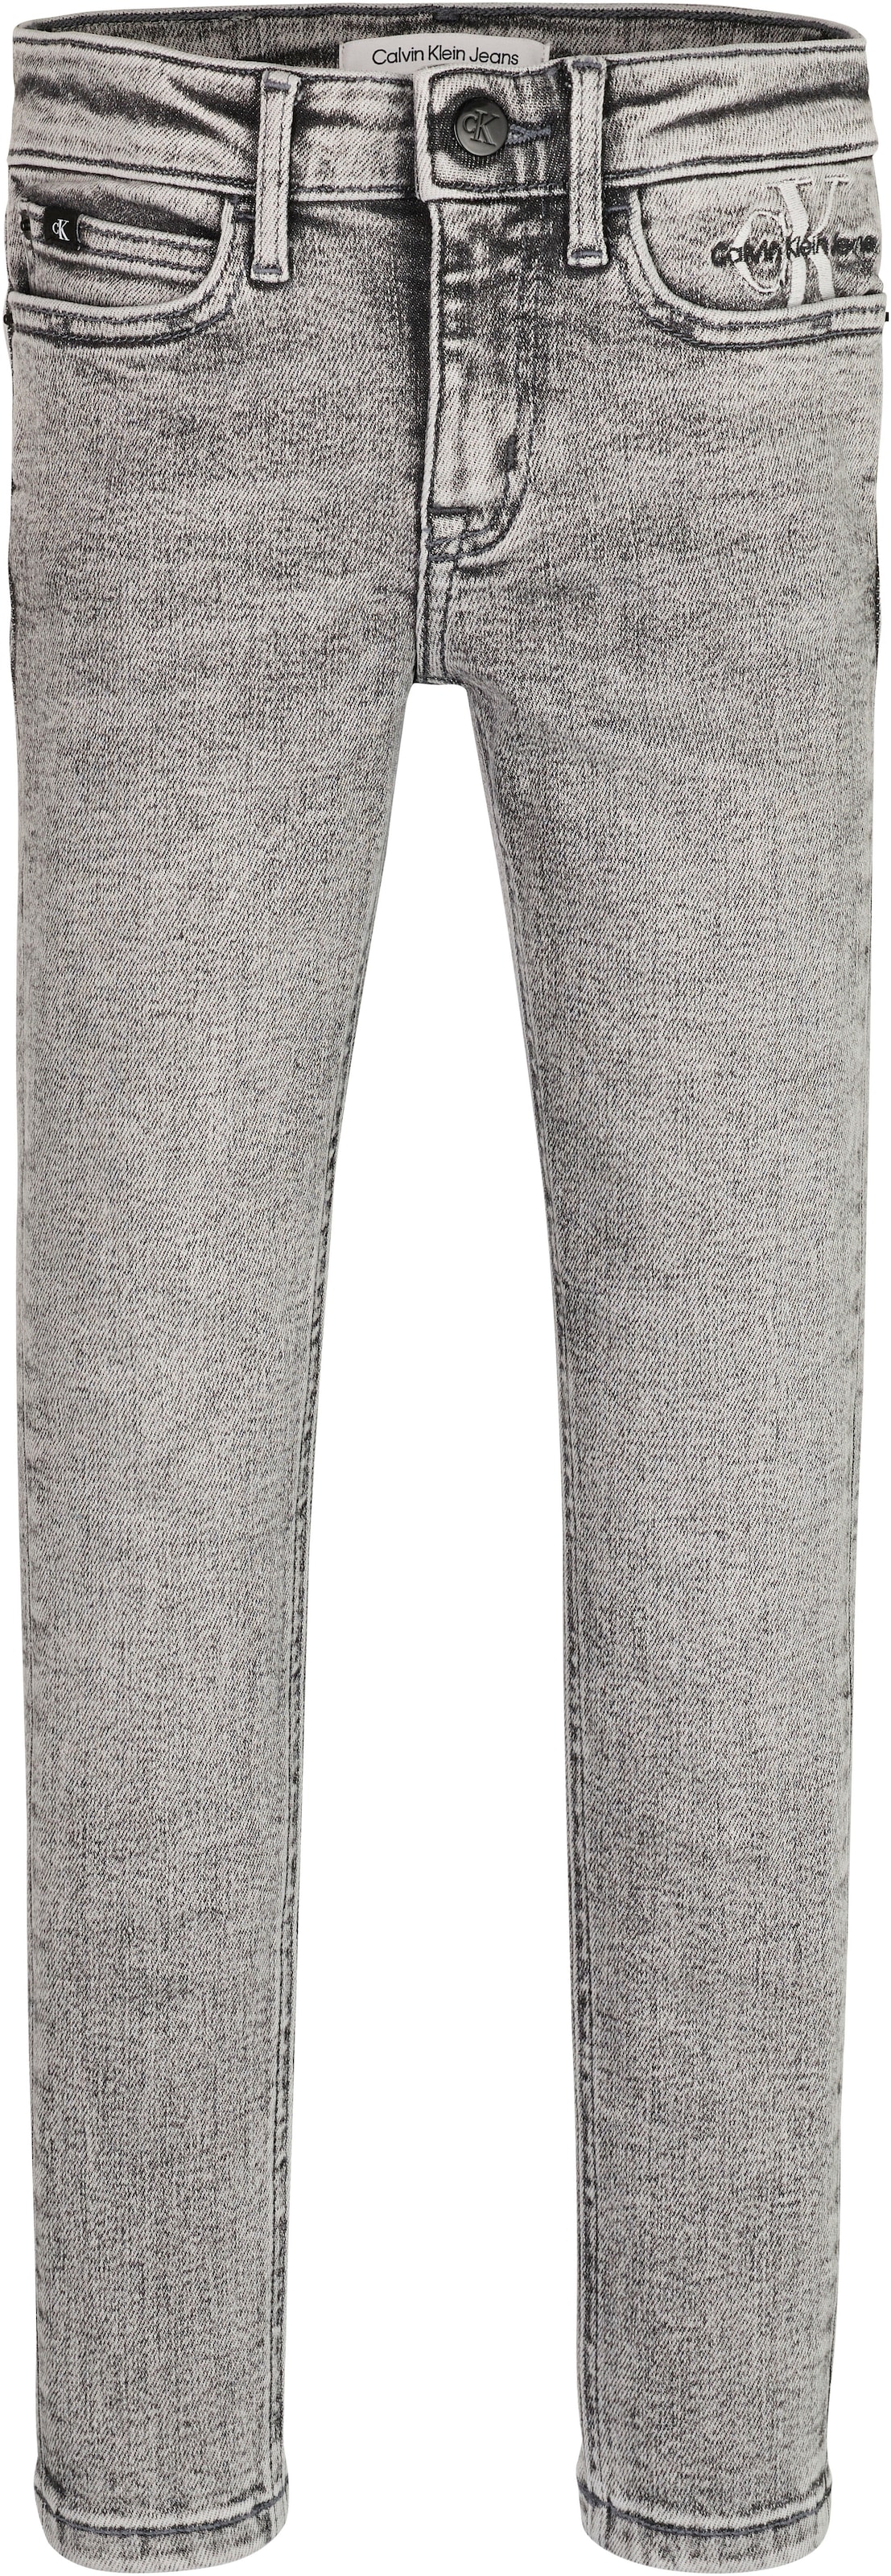 GREY« WASHED Stretch-Jeans Calvin Klein MR Jeans bei »SKINNY ♕